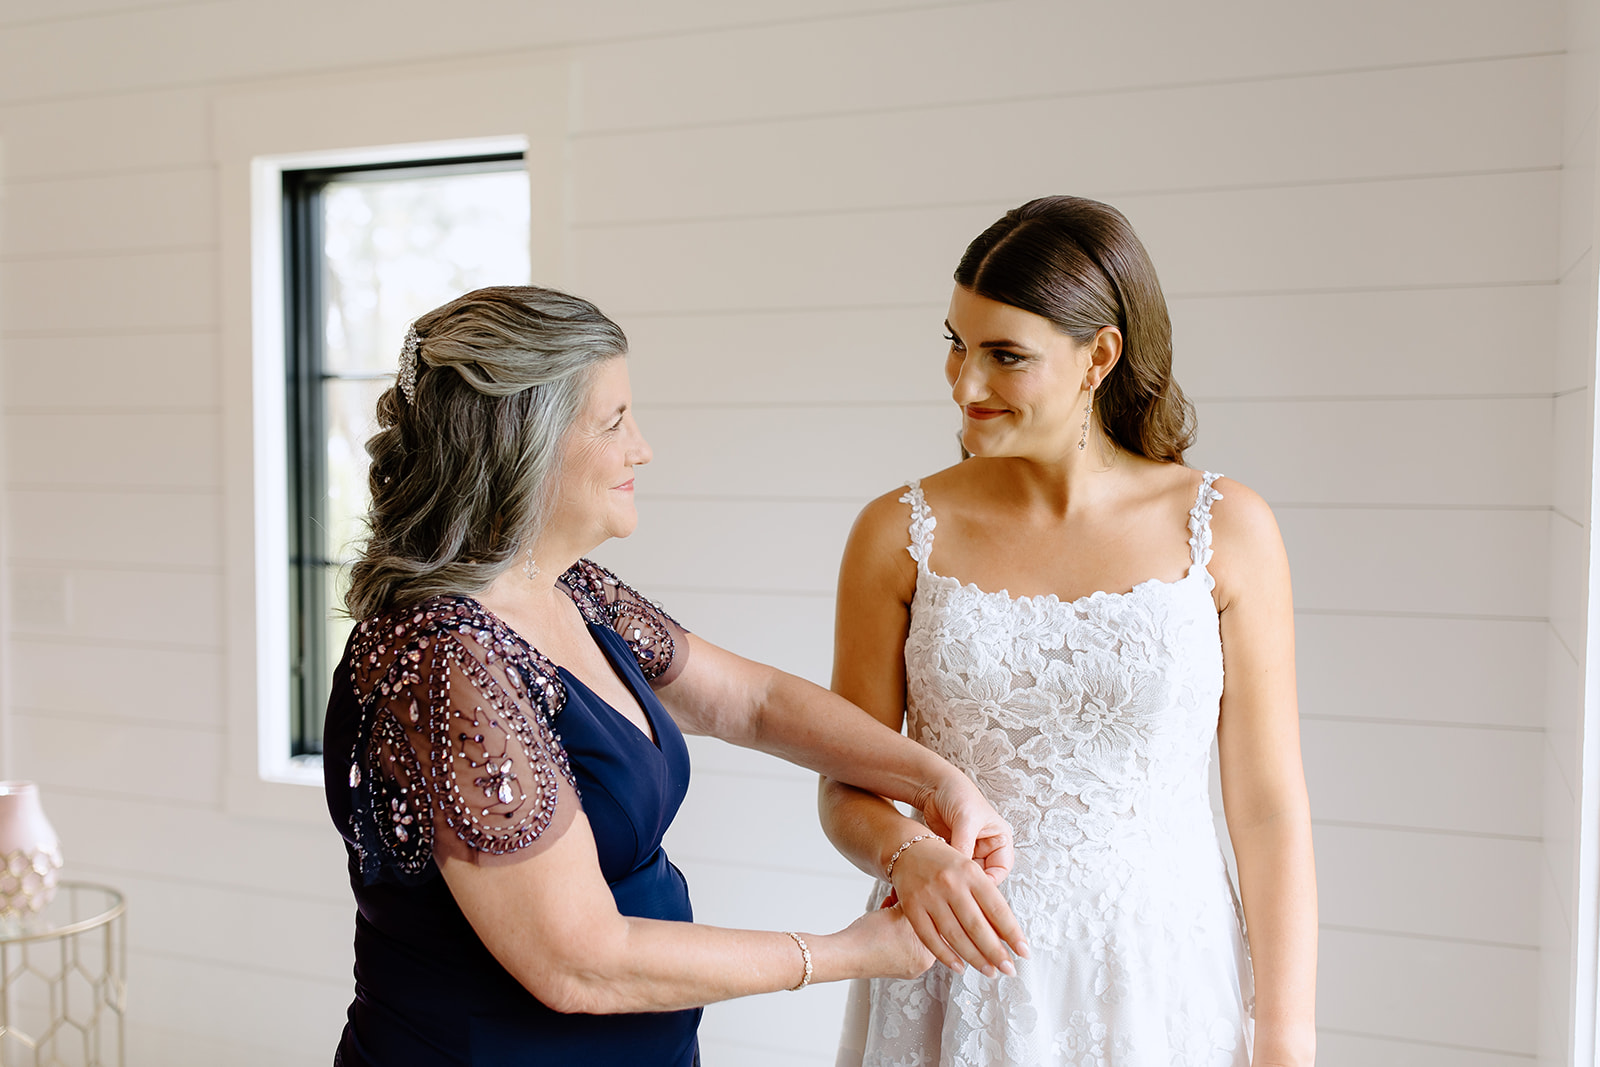 Mother of the bride putting a bracelet on her daughter